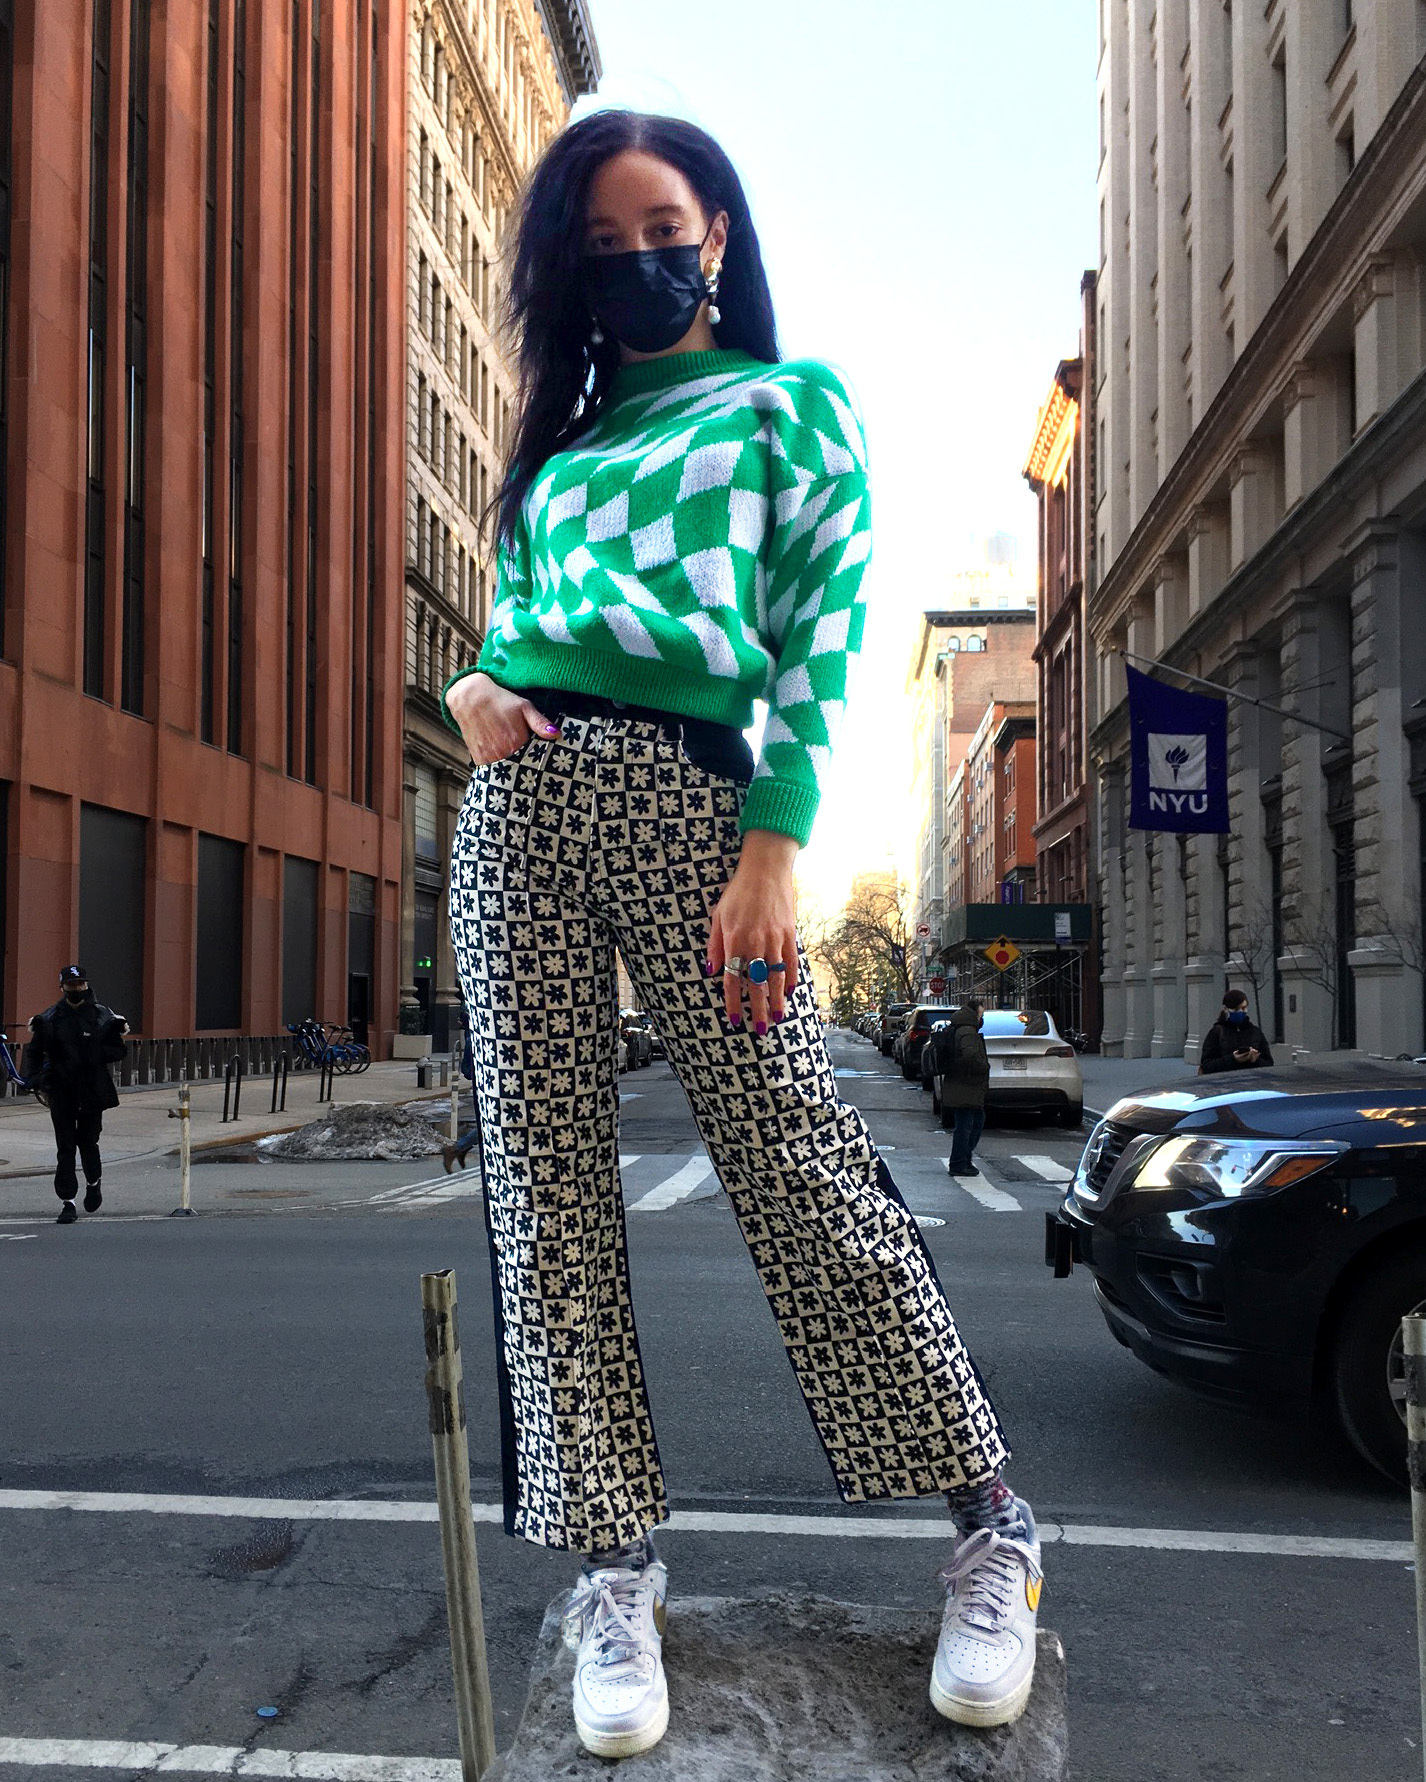 A person wearing a green and white checkered sweater and black and white geometric printed pants